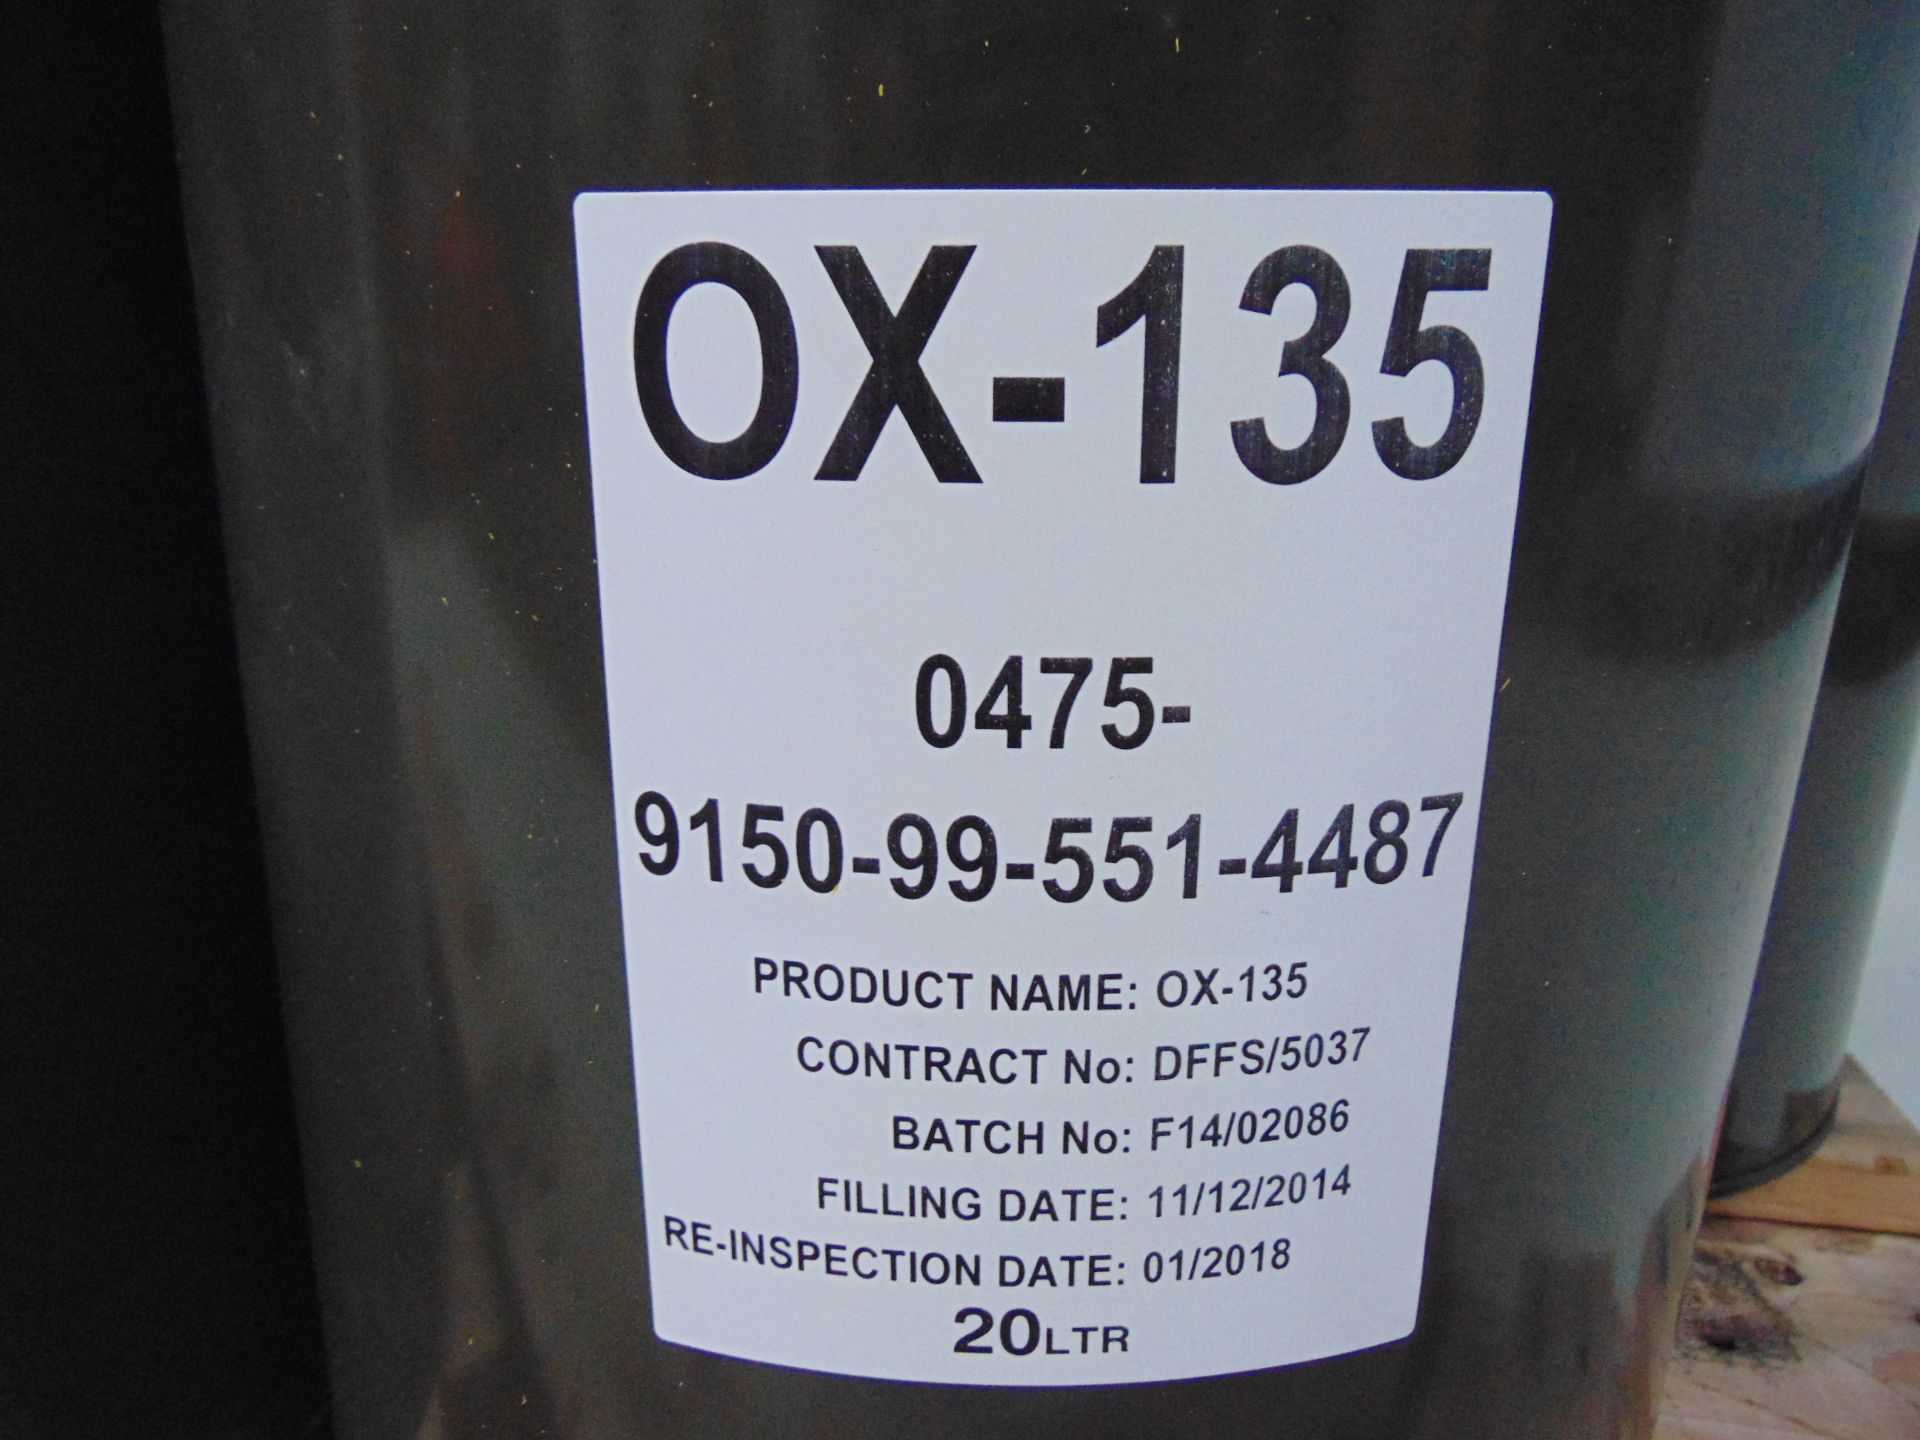 15 x Unissued 20L Cans of OX-135 Refridgerant Compressor Lubricating Oil - Image 6 of 6